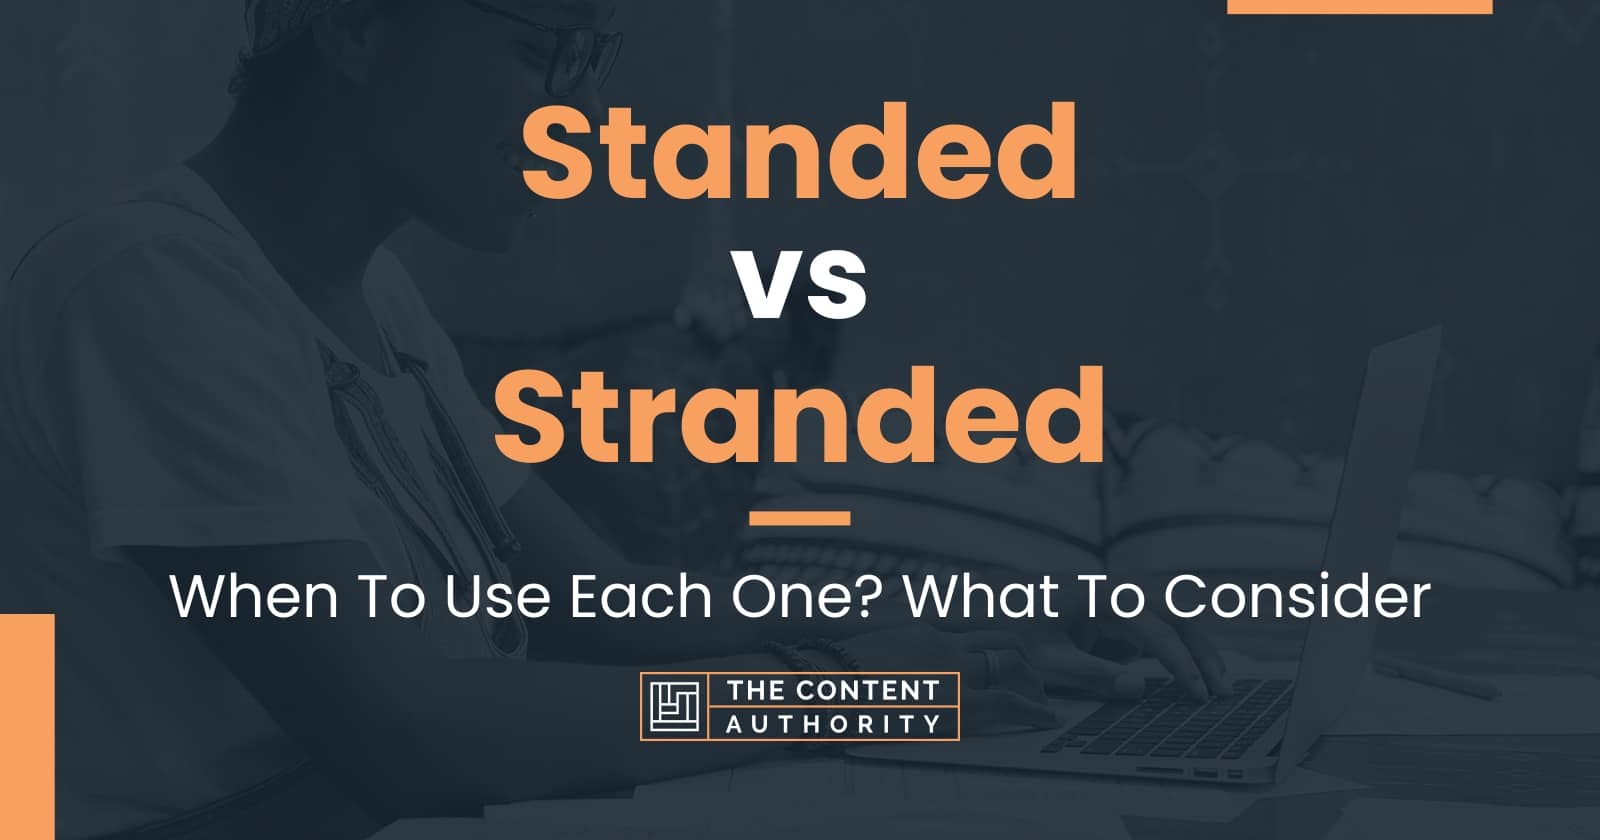 Standed vs Stranded: When To Use Each One? What To Consider